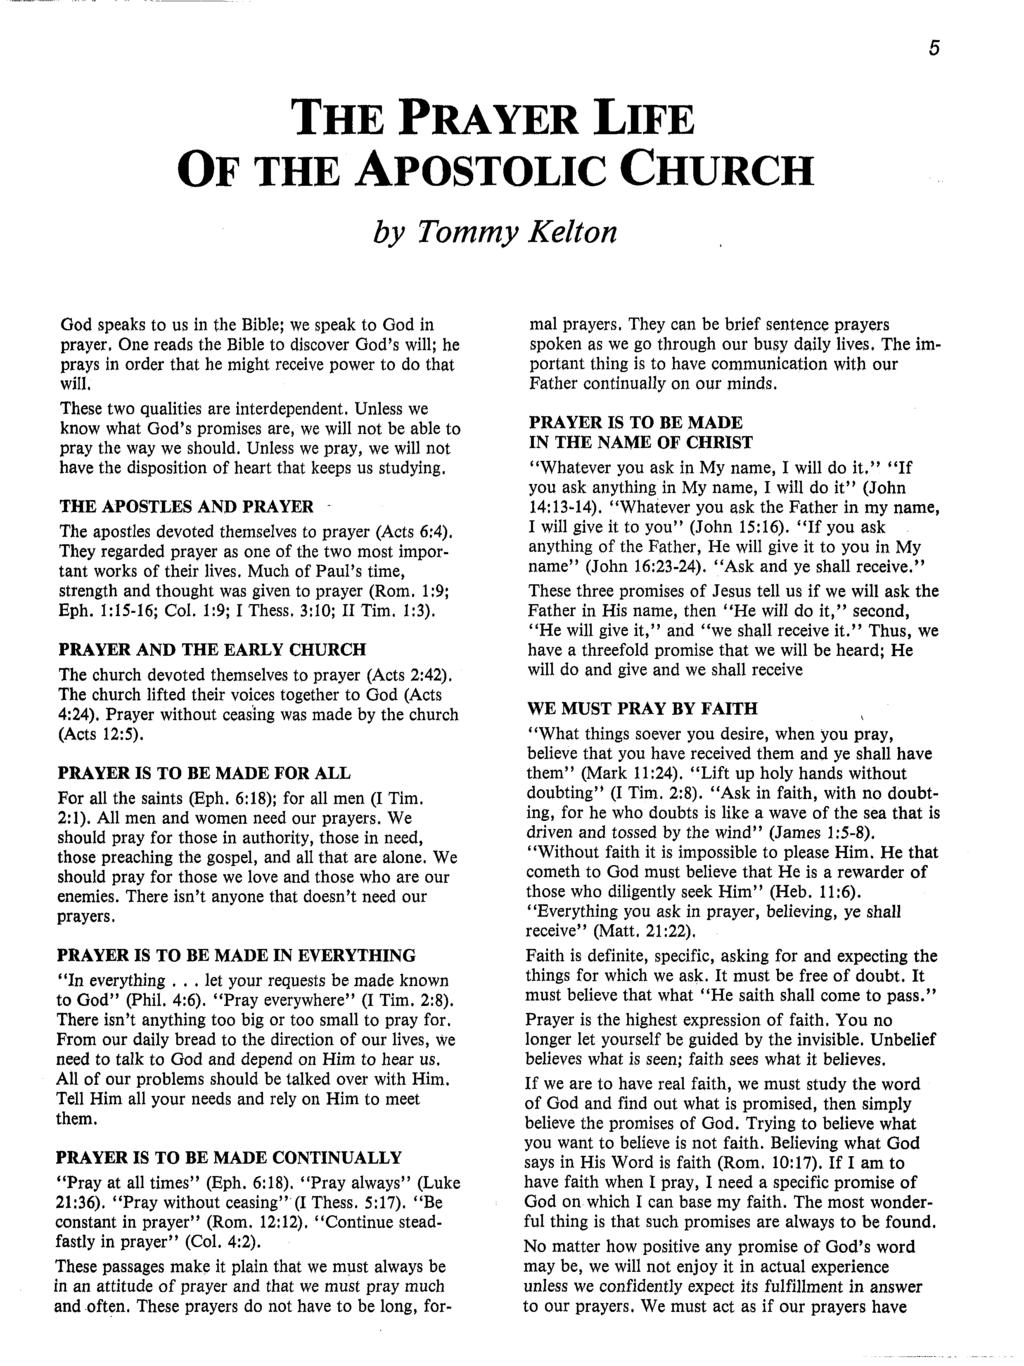 THE PRAYER LIFE OF THE APOSTOLIC by Tommy Kelton CHURCH 5 God speaks to us in the Bible; we speak to God in prayer, One reads the Bible to discover God s will; he prays in order that he might receive